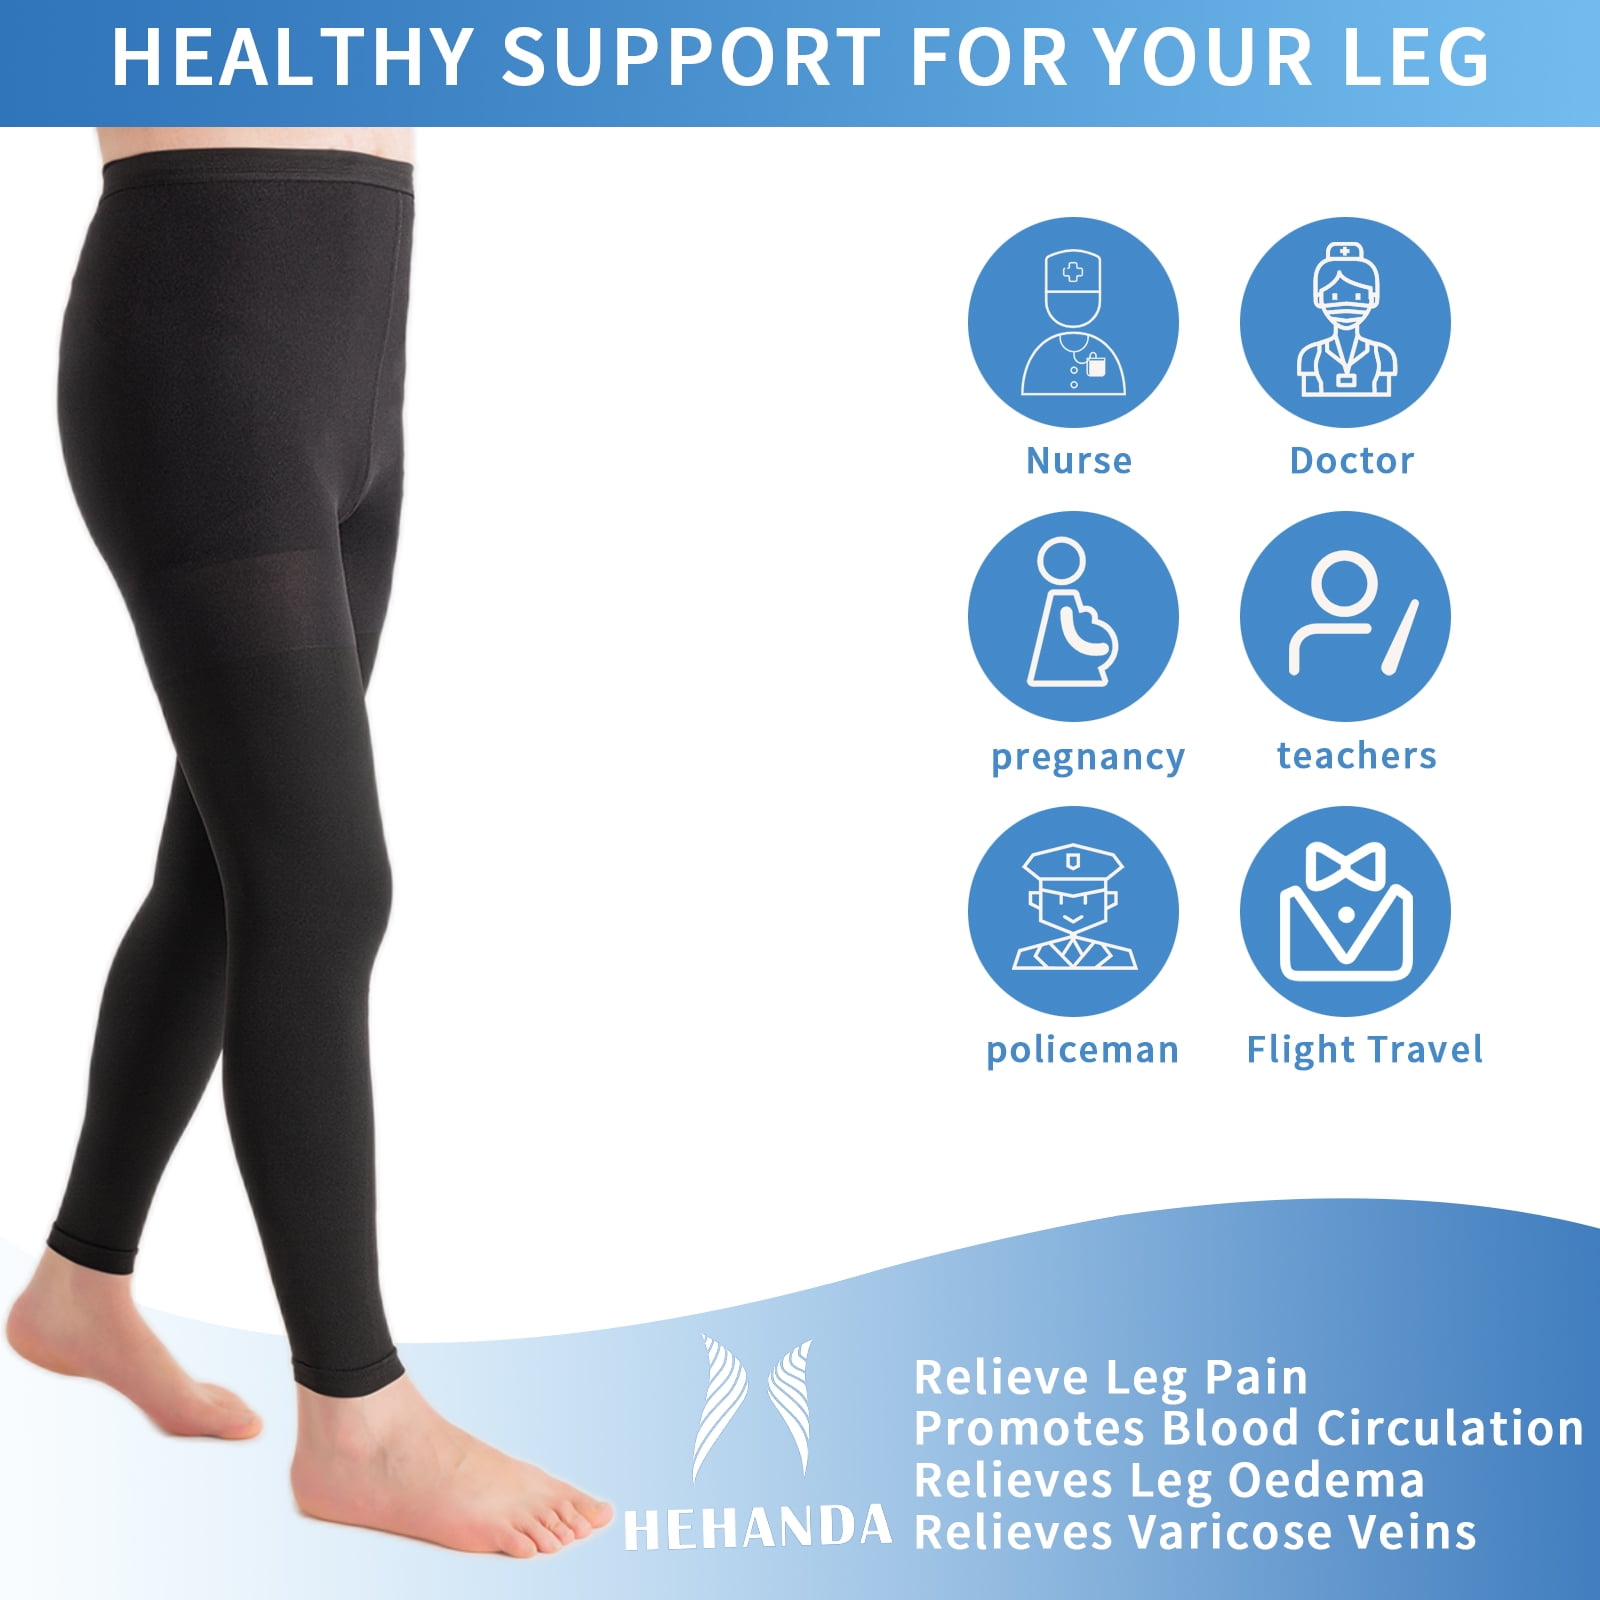 MGANG Compression Socks Plus Size 4XL Knee-Hi Stockings - 20-30mmHg  Graduated Compression for Spider Veins, Swelling, Venous Insufficiency and